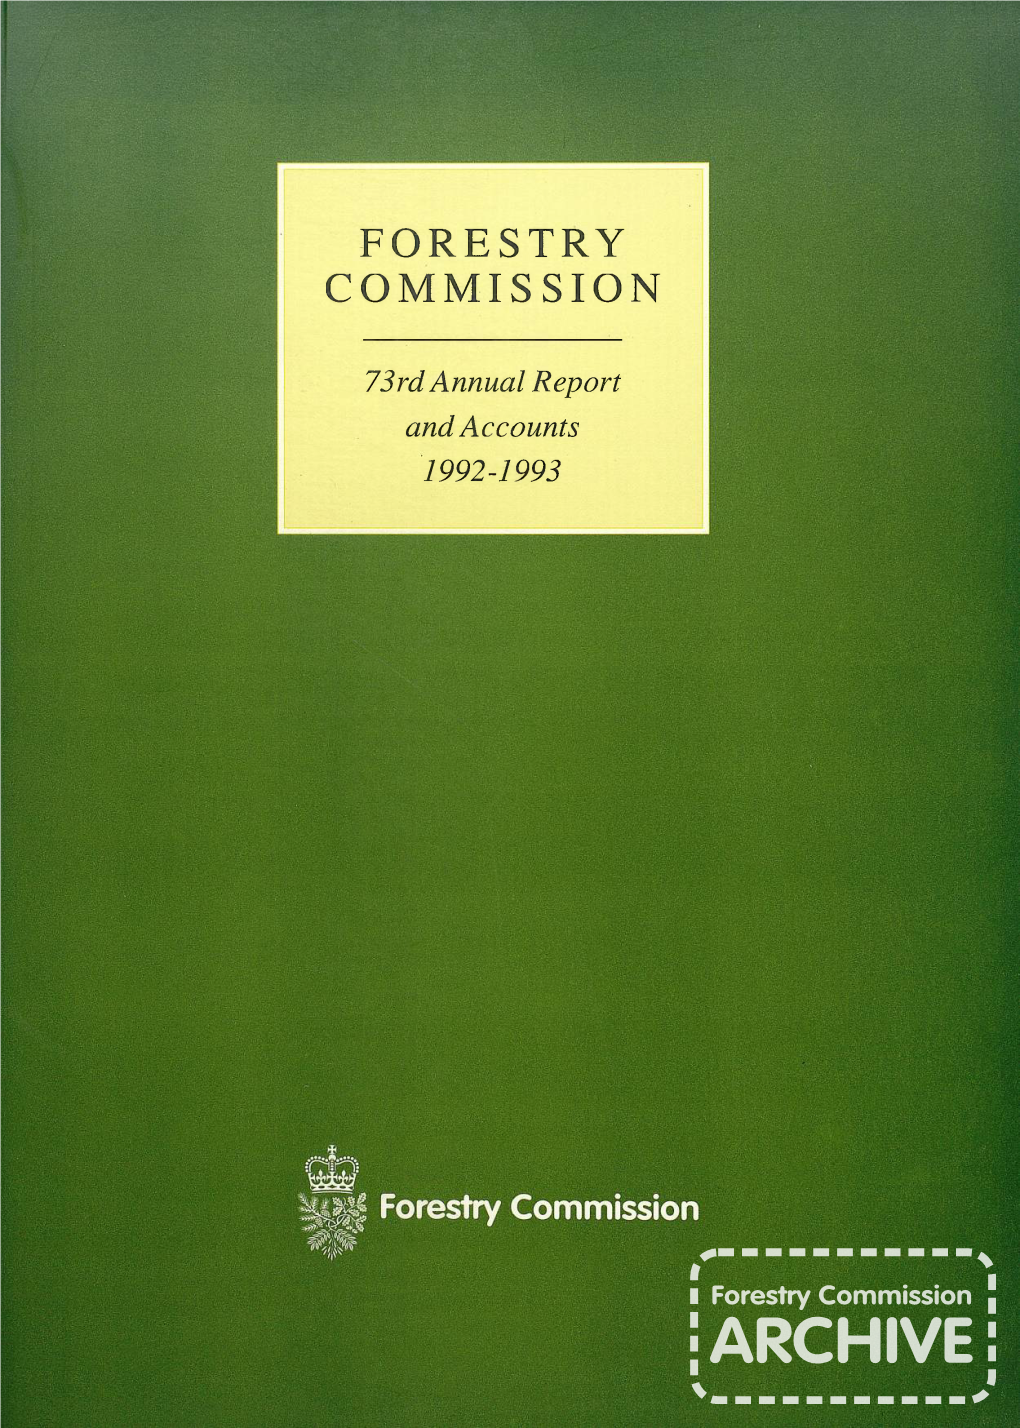 Forestry Commission Annual Report 1992-1993